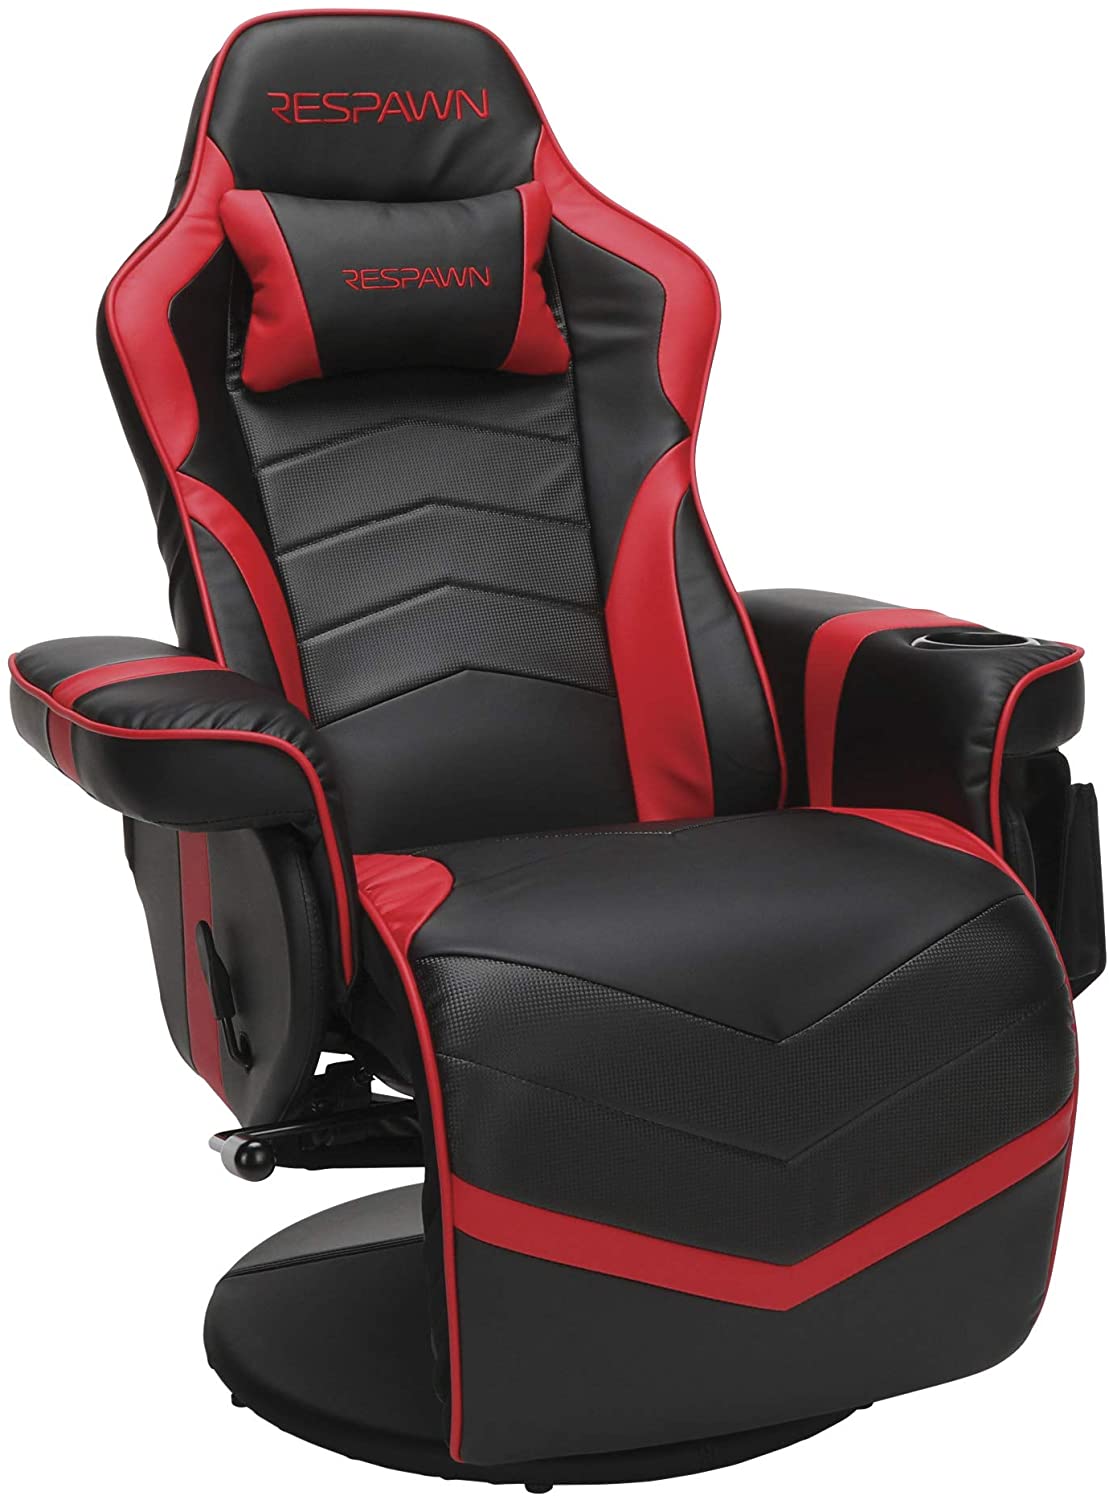 9 Best Gaming Chairs For Dads In 2021